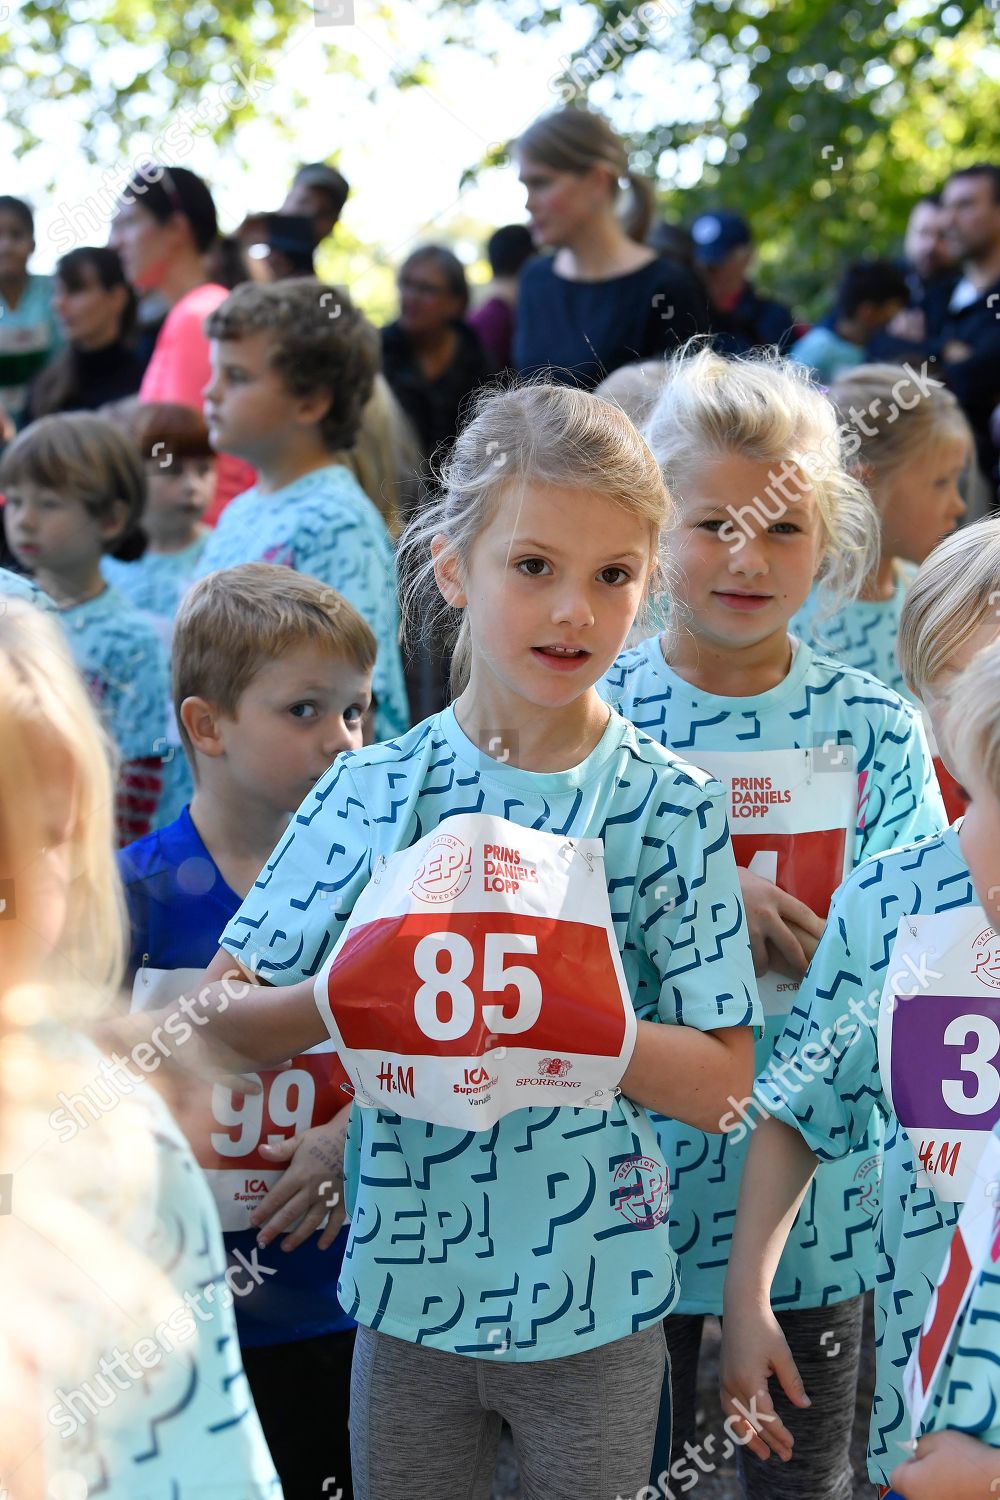 race-and-pep-day-stockholm-sweden-shutterstock-editorial-9884111z.jpg